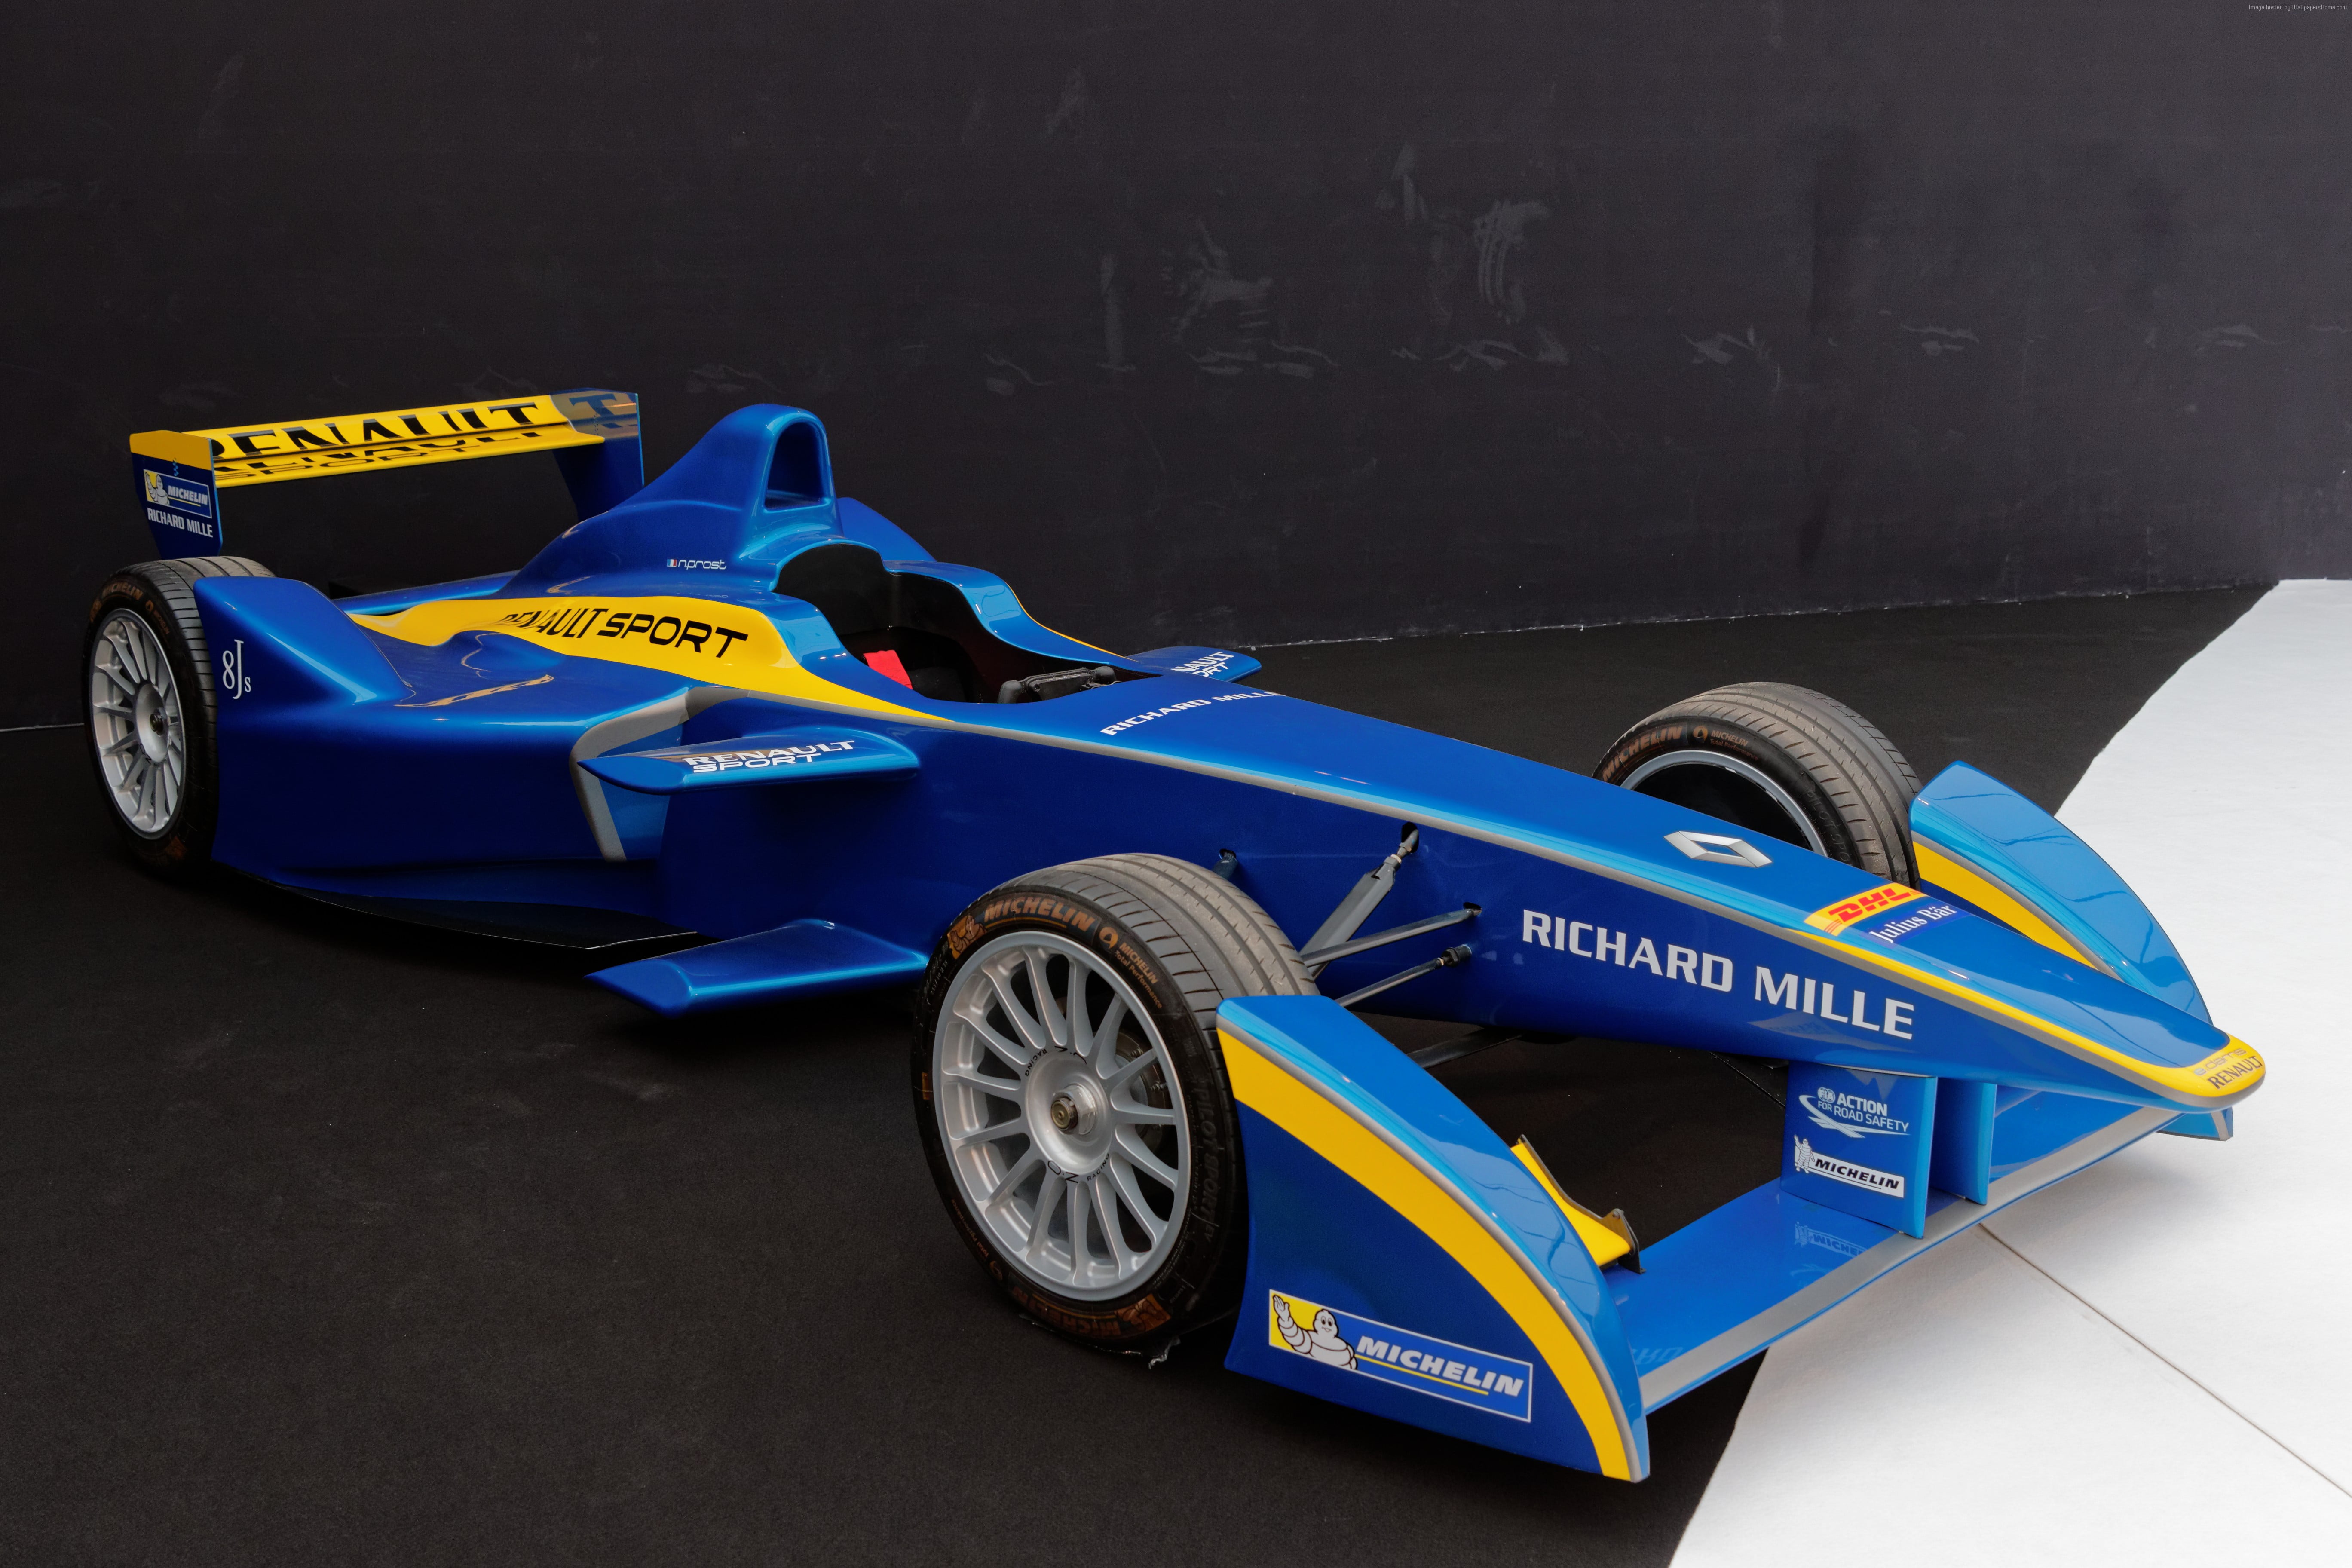 blue and yellow Renault Richard Mille formula 1 car on black surface